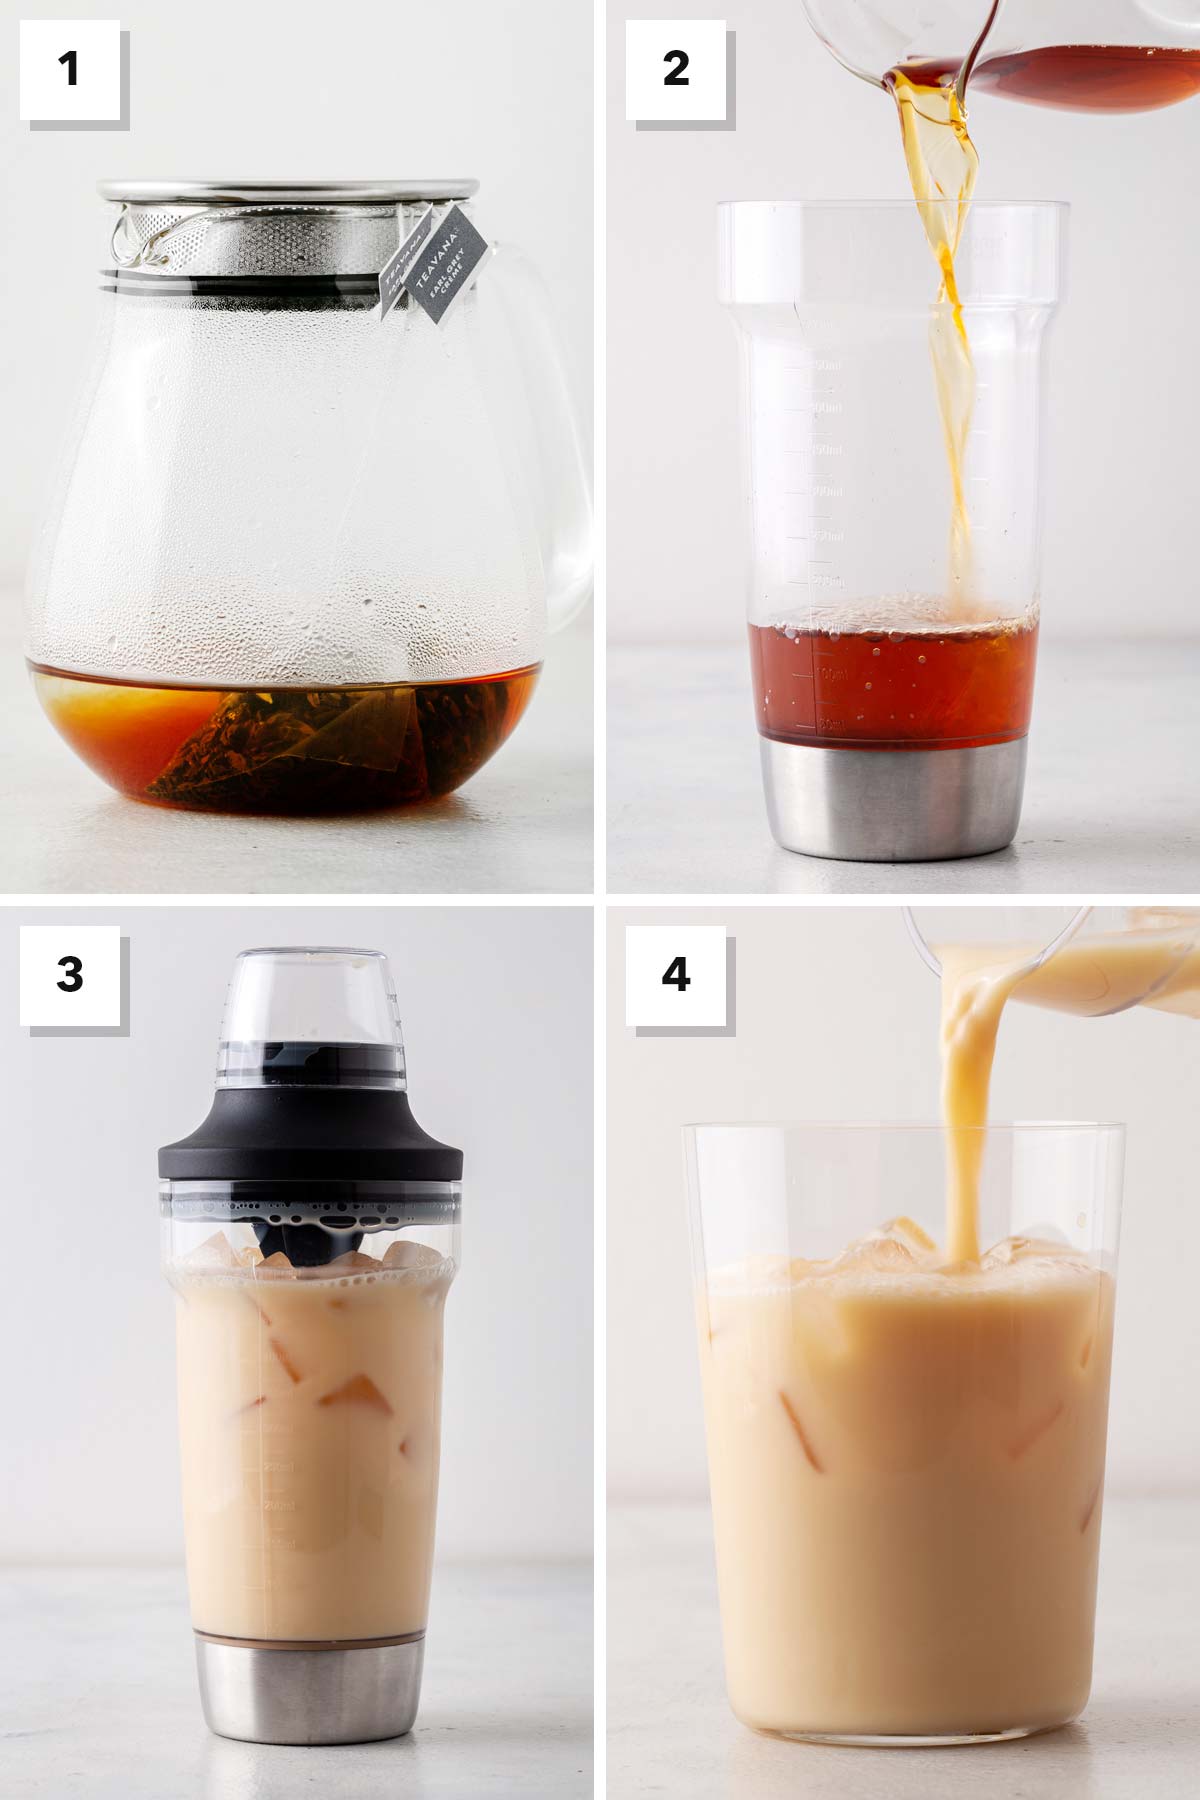 Starbucks Iced London Fog Tea Latte copycat four steps for how to make it, in photos.